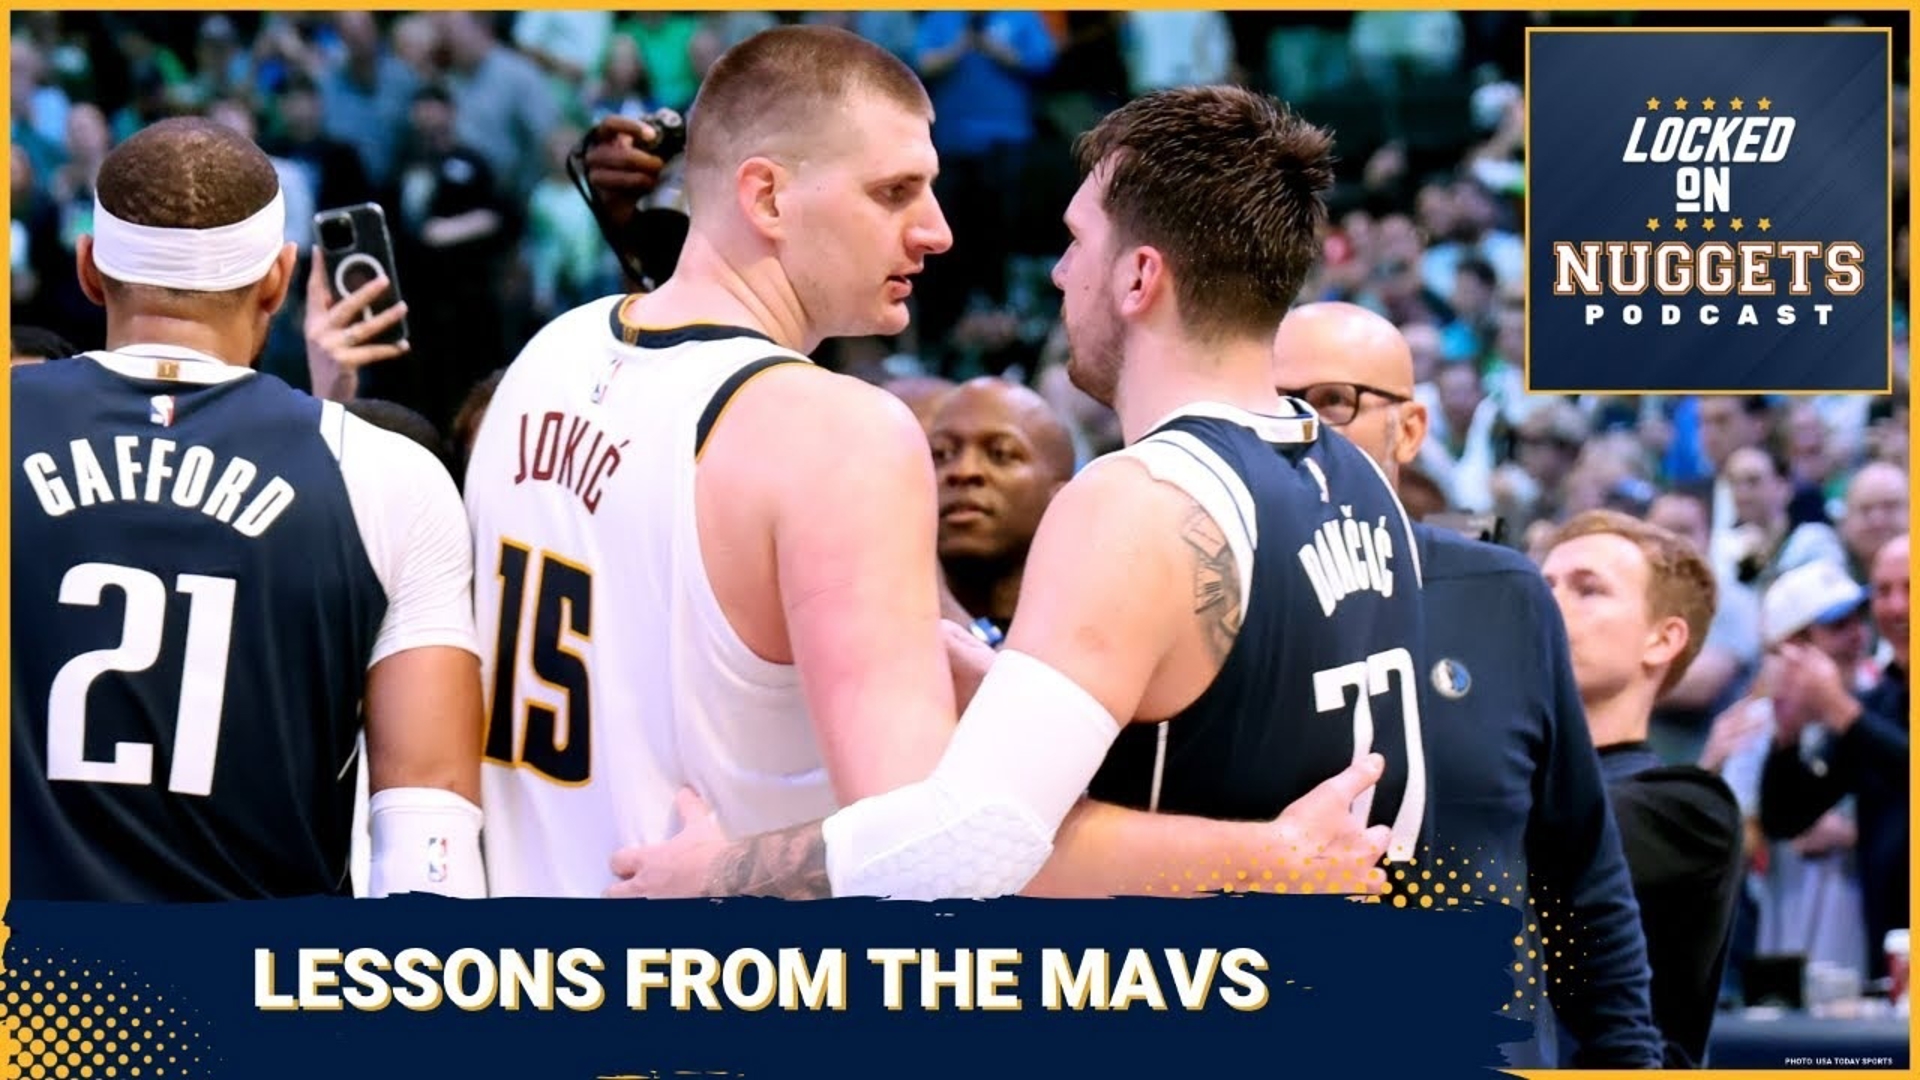 The Mavericks are headed to the Finals and their midseason trades are one of the main catalyst behind their ascension.